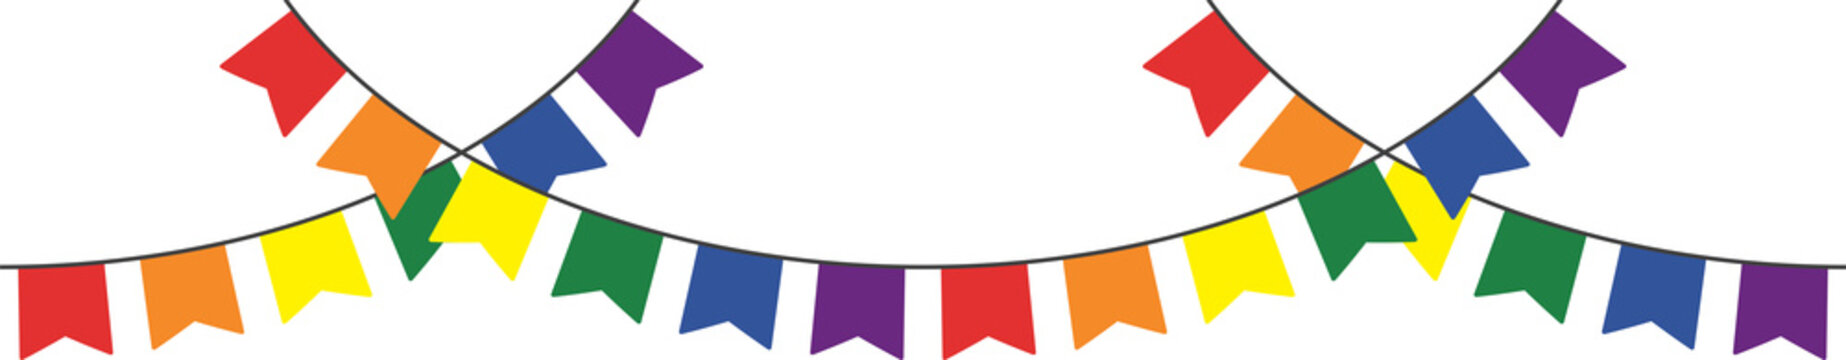 Rainbow colored party bunting. LGBTQI concept. Flat design illustration.